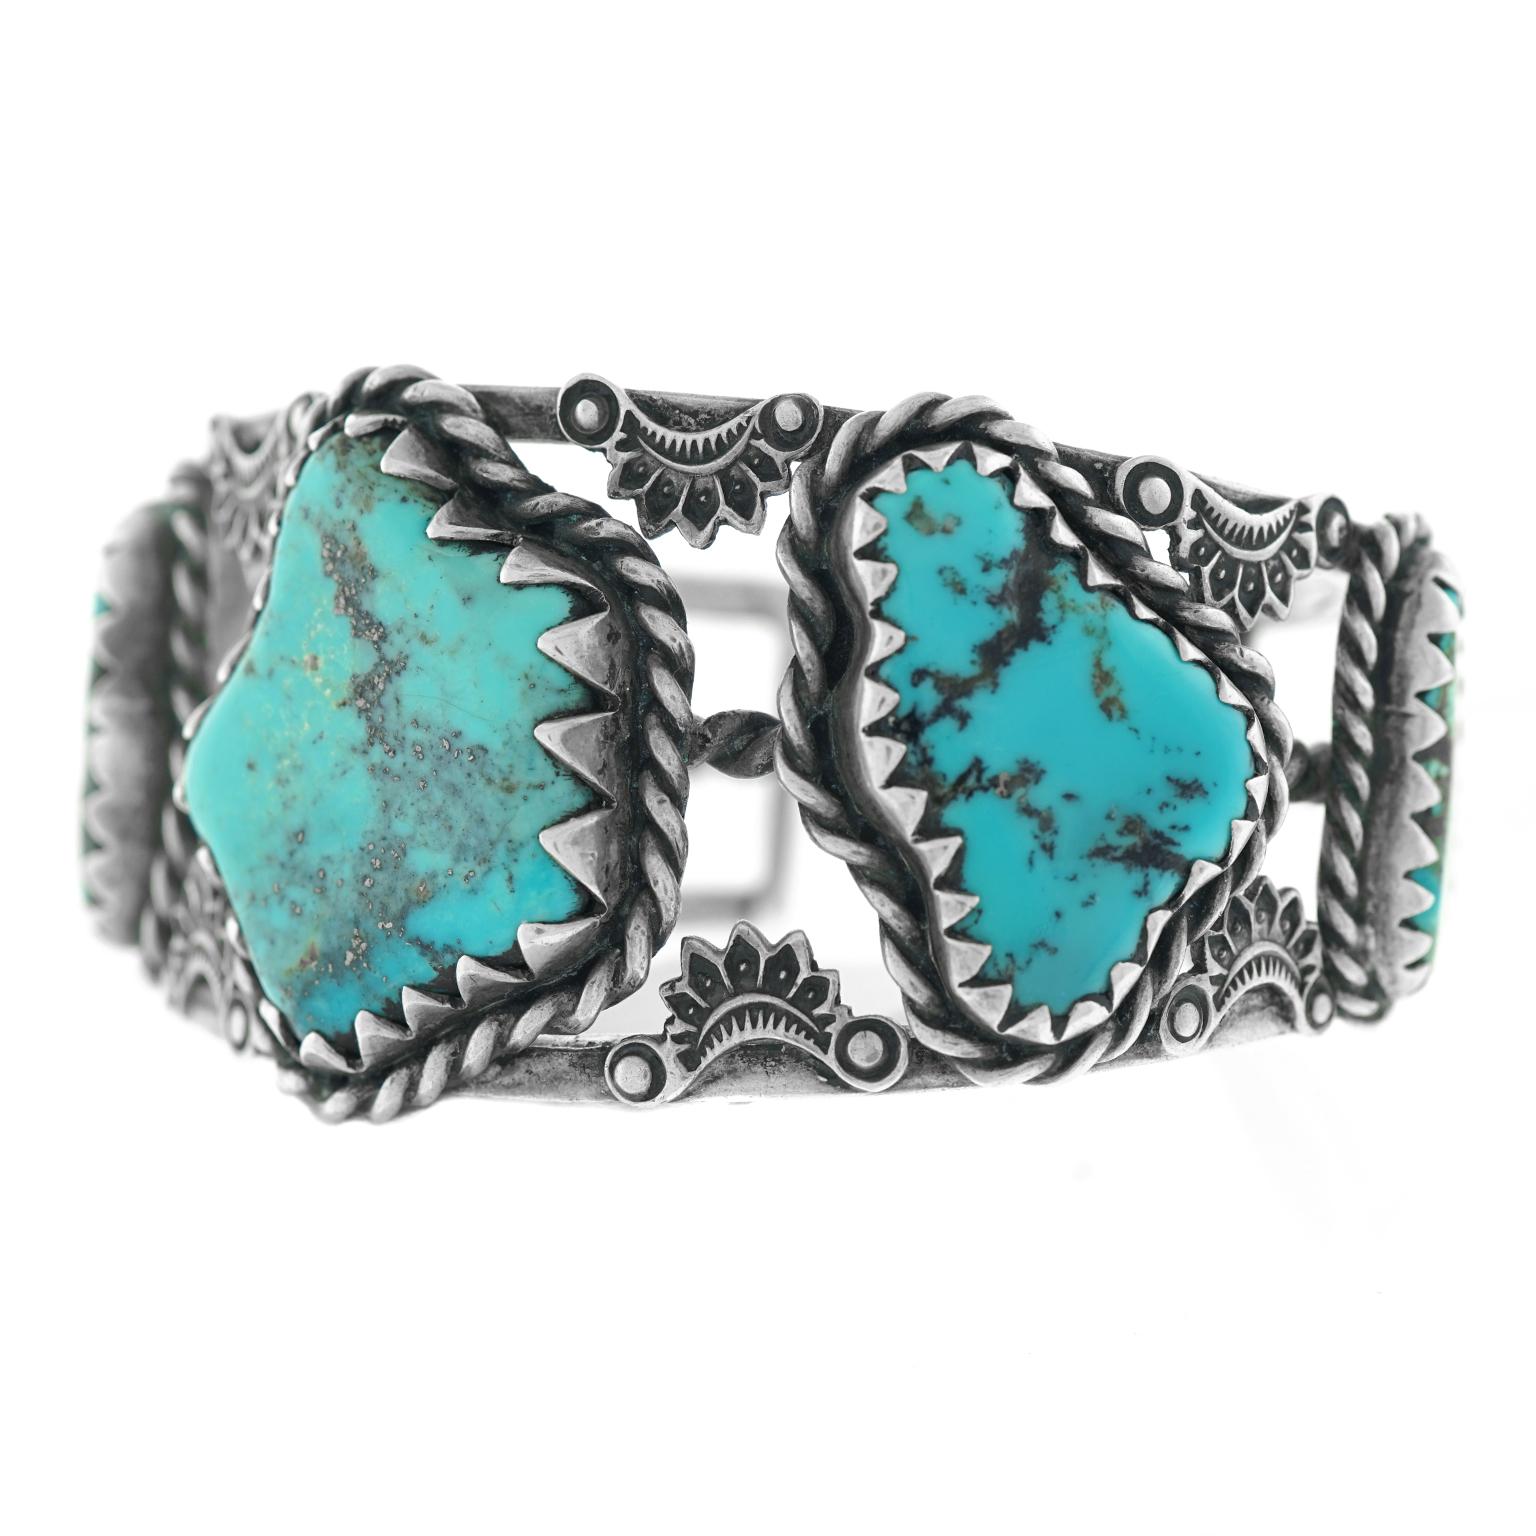 Native American Navajo Sterling Openwork Cuff with Five Large Turquoise Stones